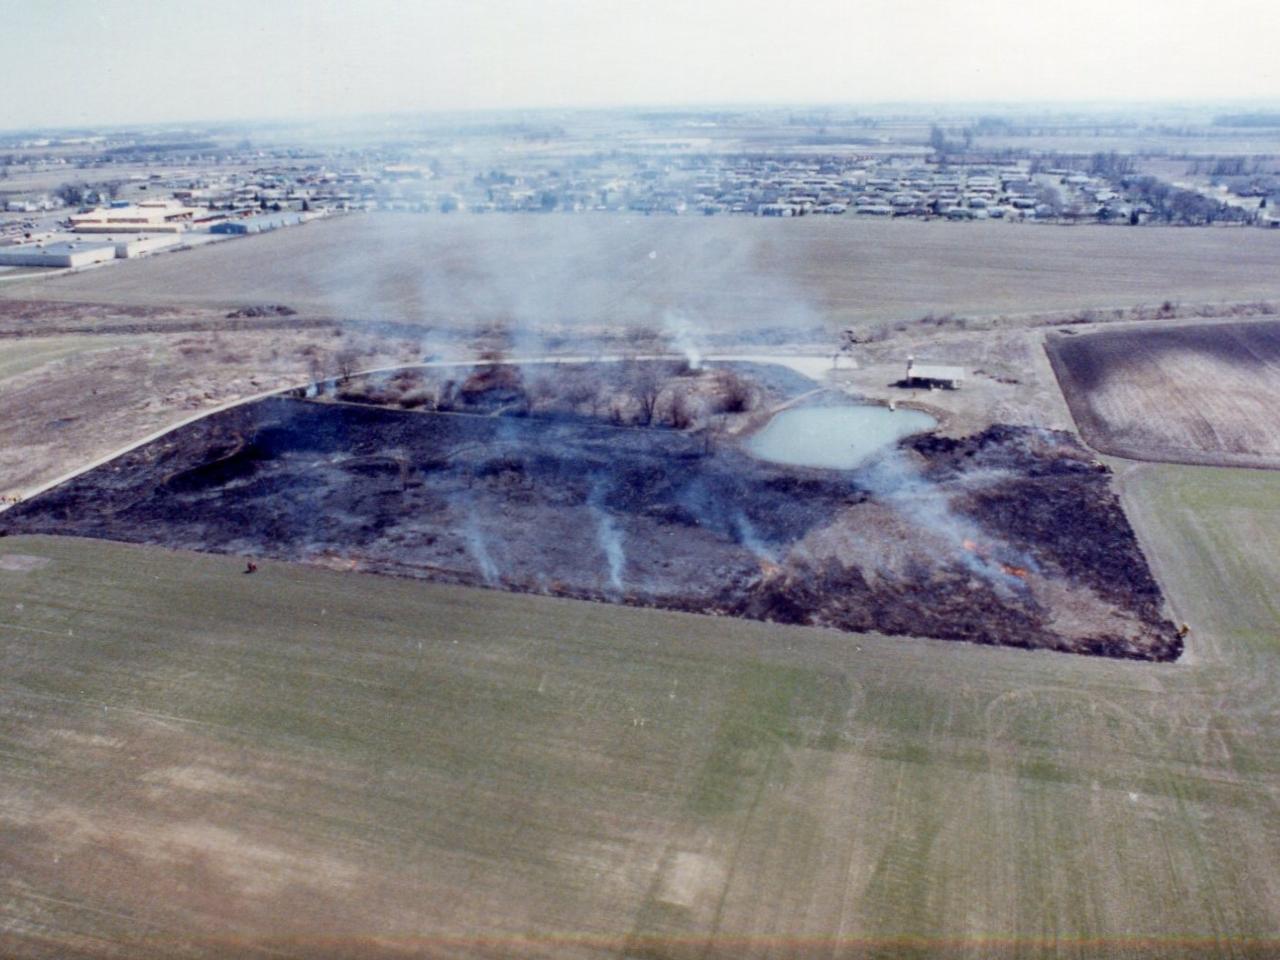 sky view of prescribed tall grass burn